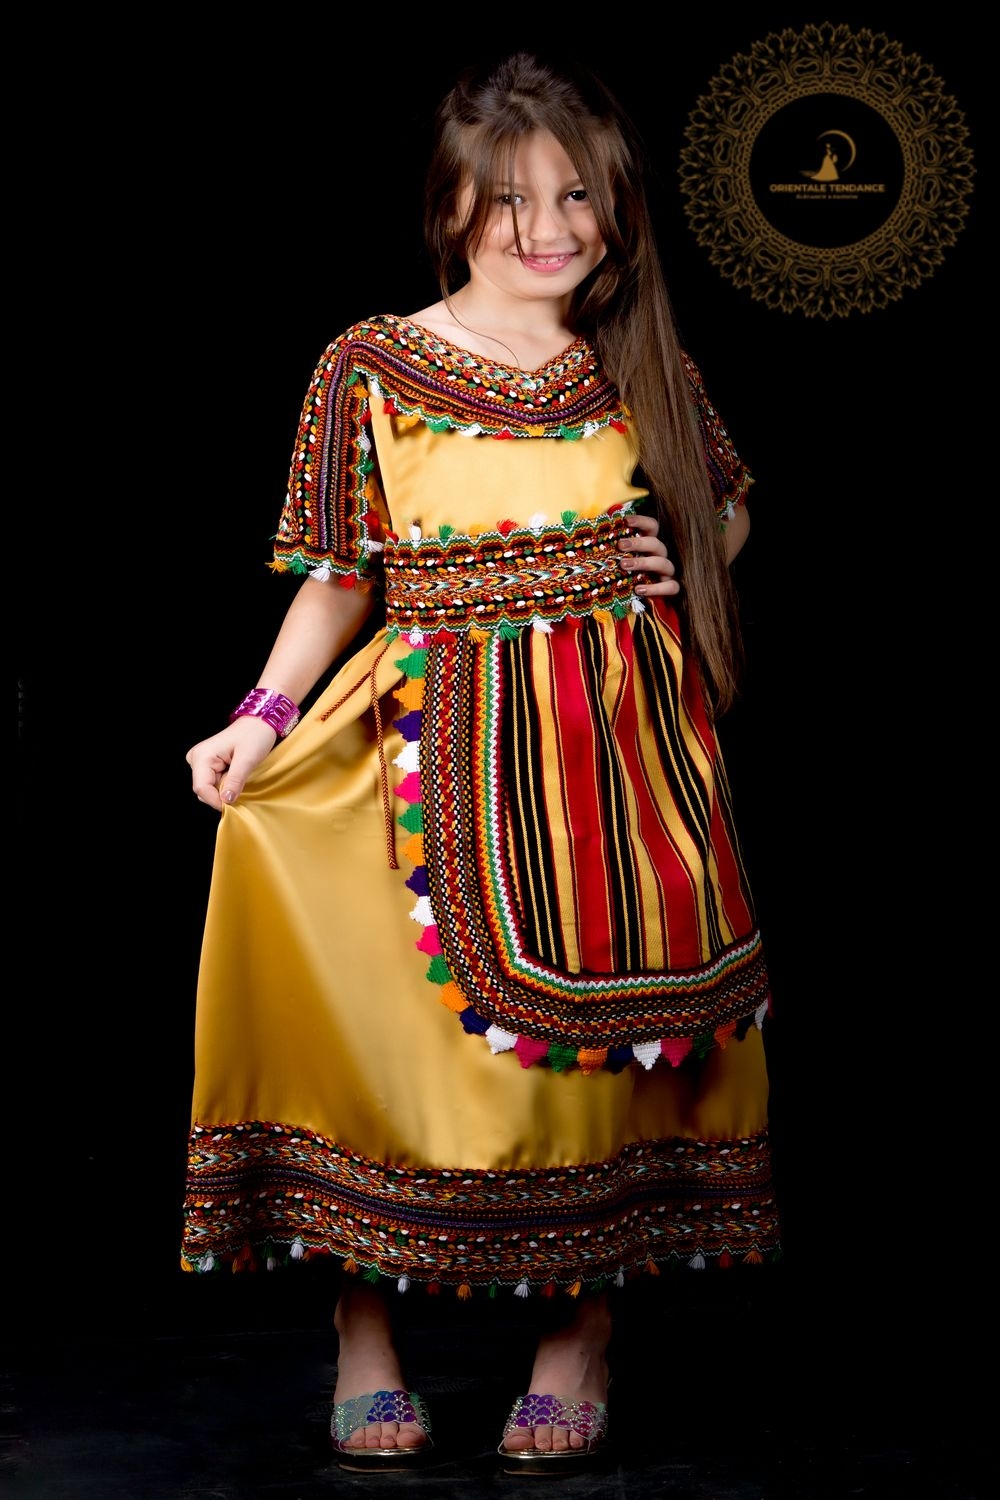 Kabyle Wedding Dating Site)